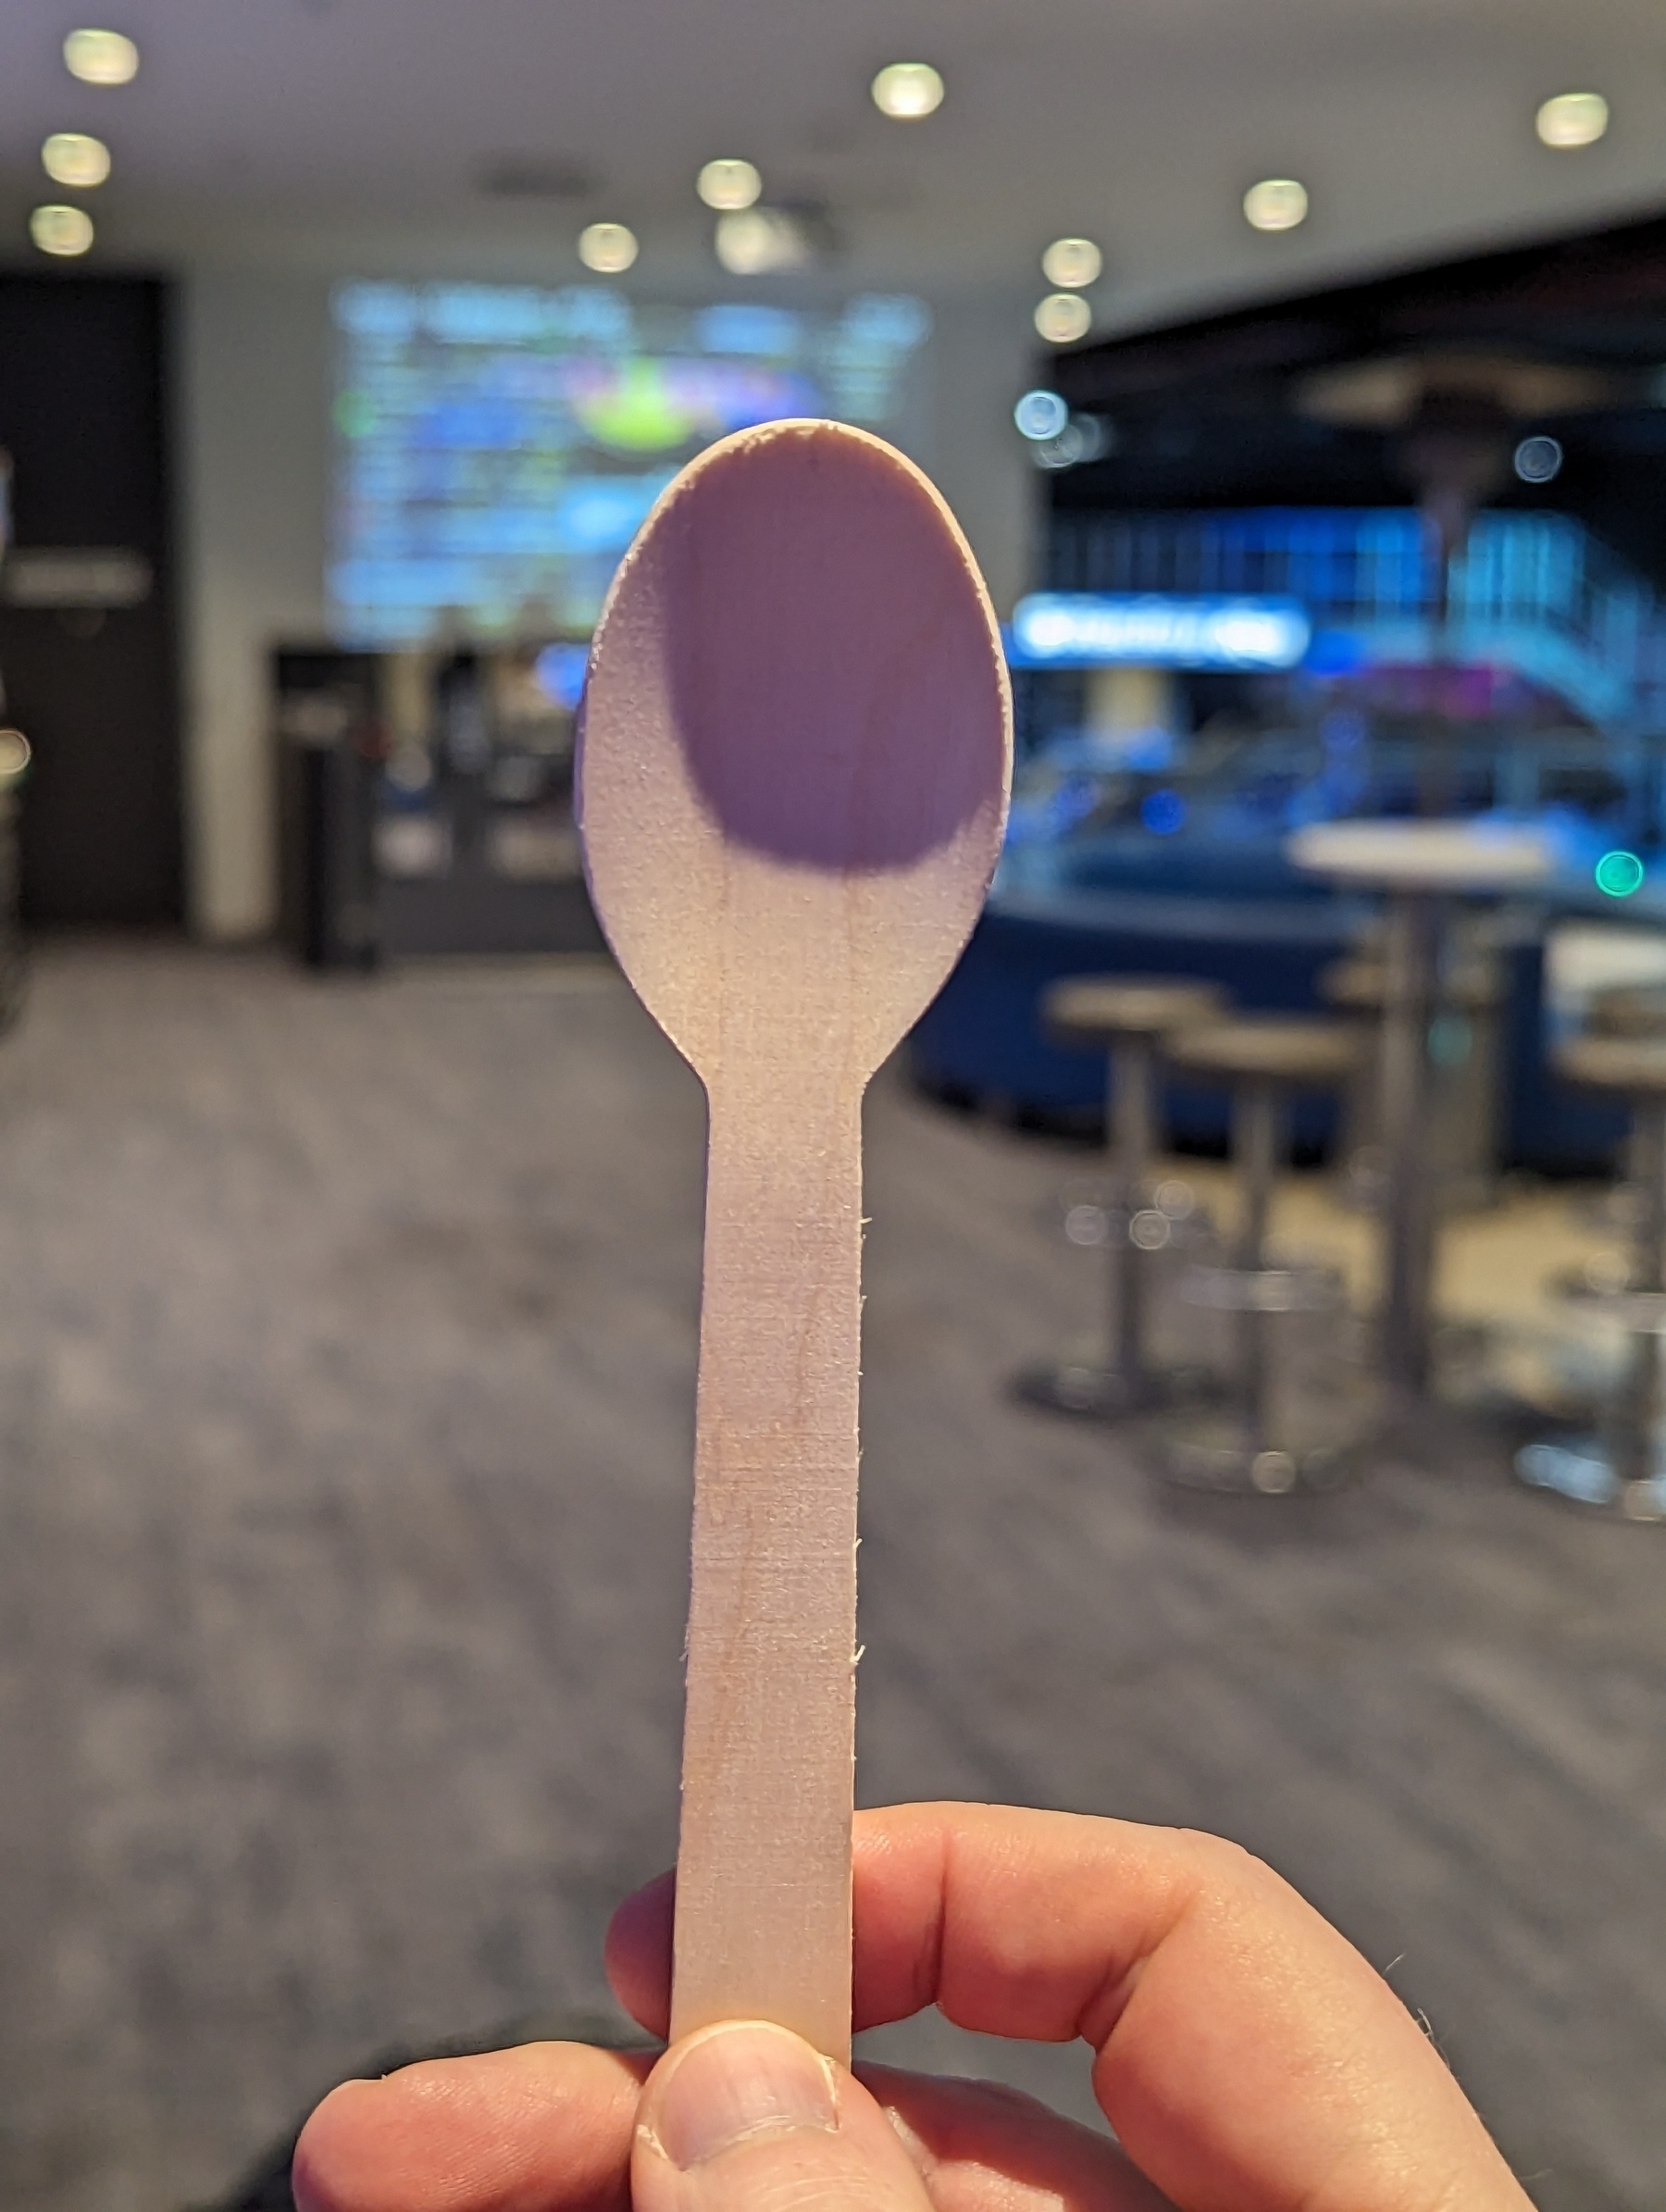 My disposable wooden spoon